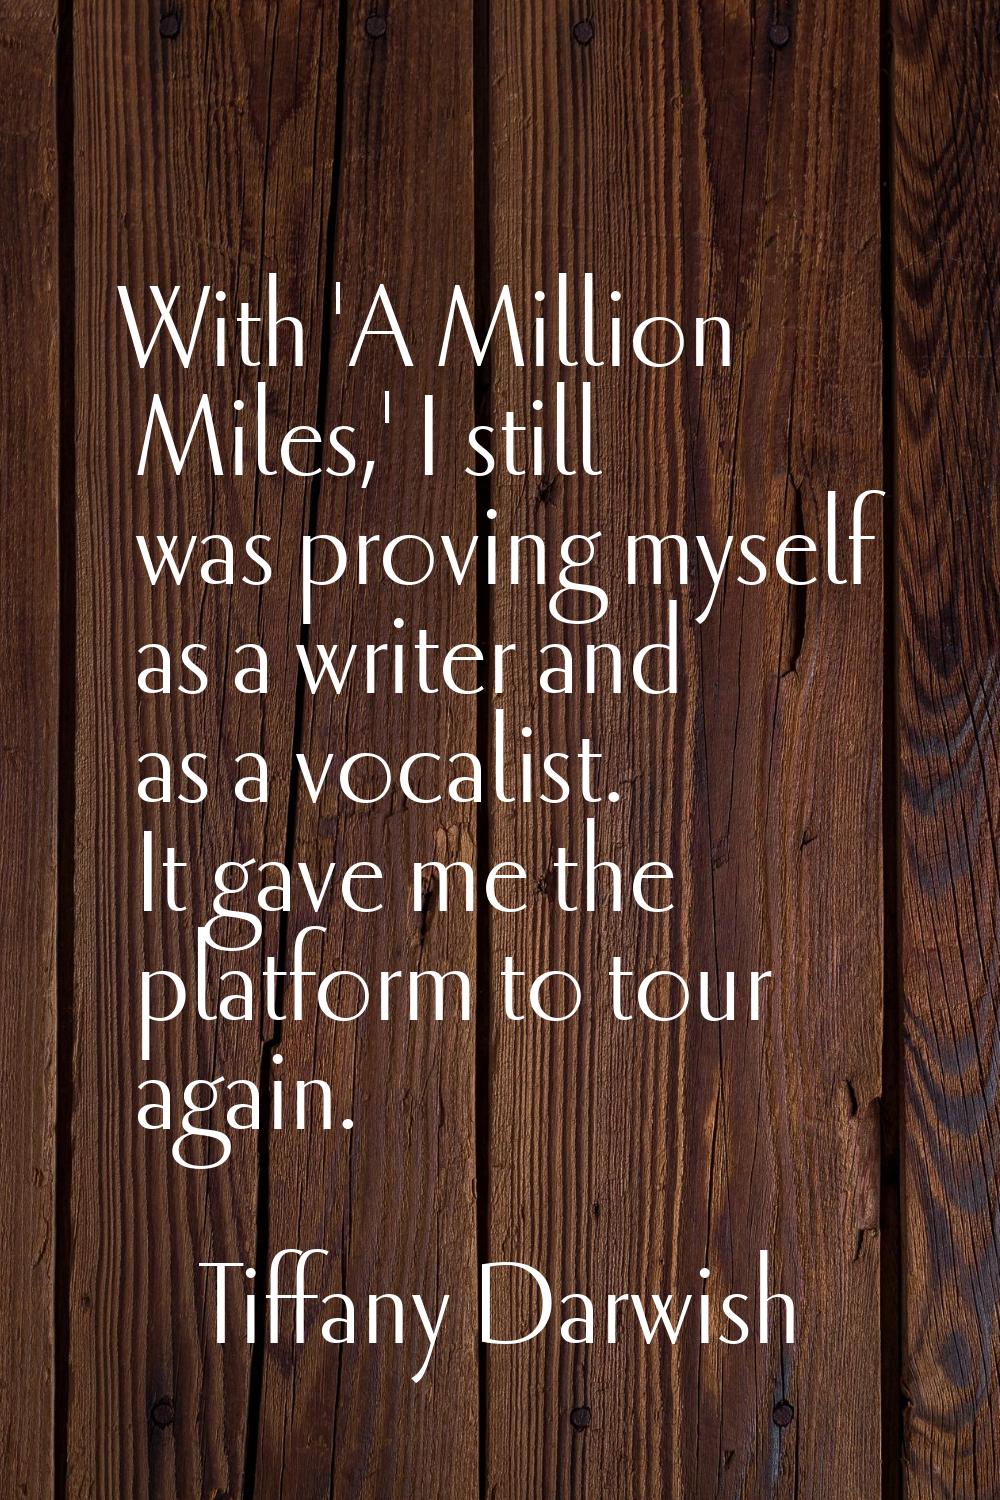 With 'A Million Miles,' I still was proving myself as a writer and as a vocalist. It gave me the pl